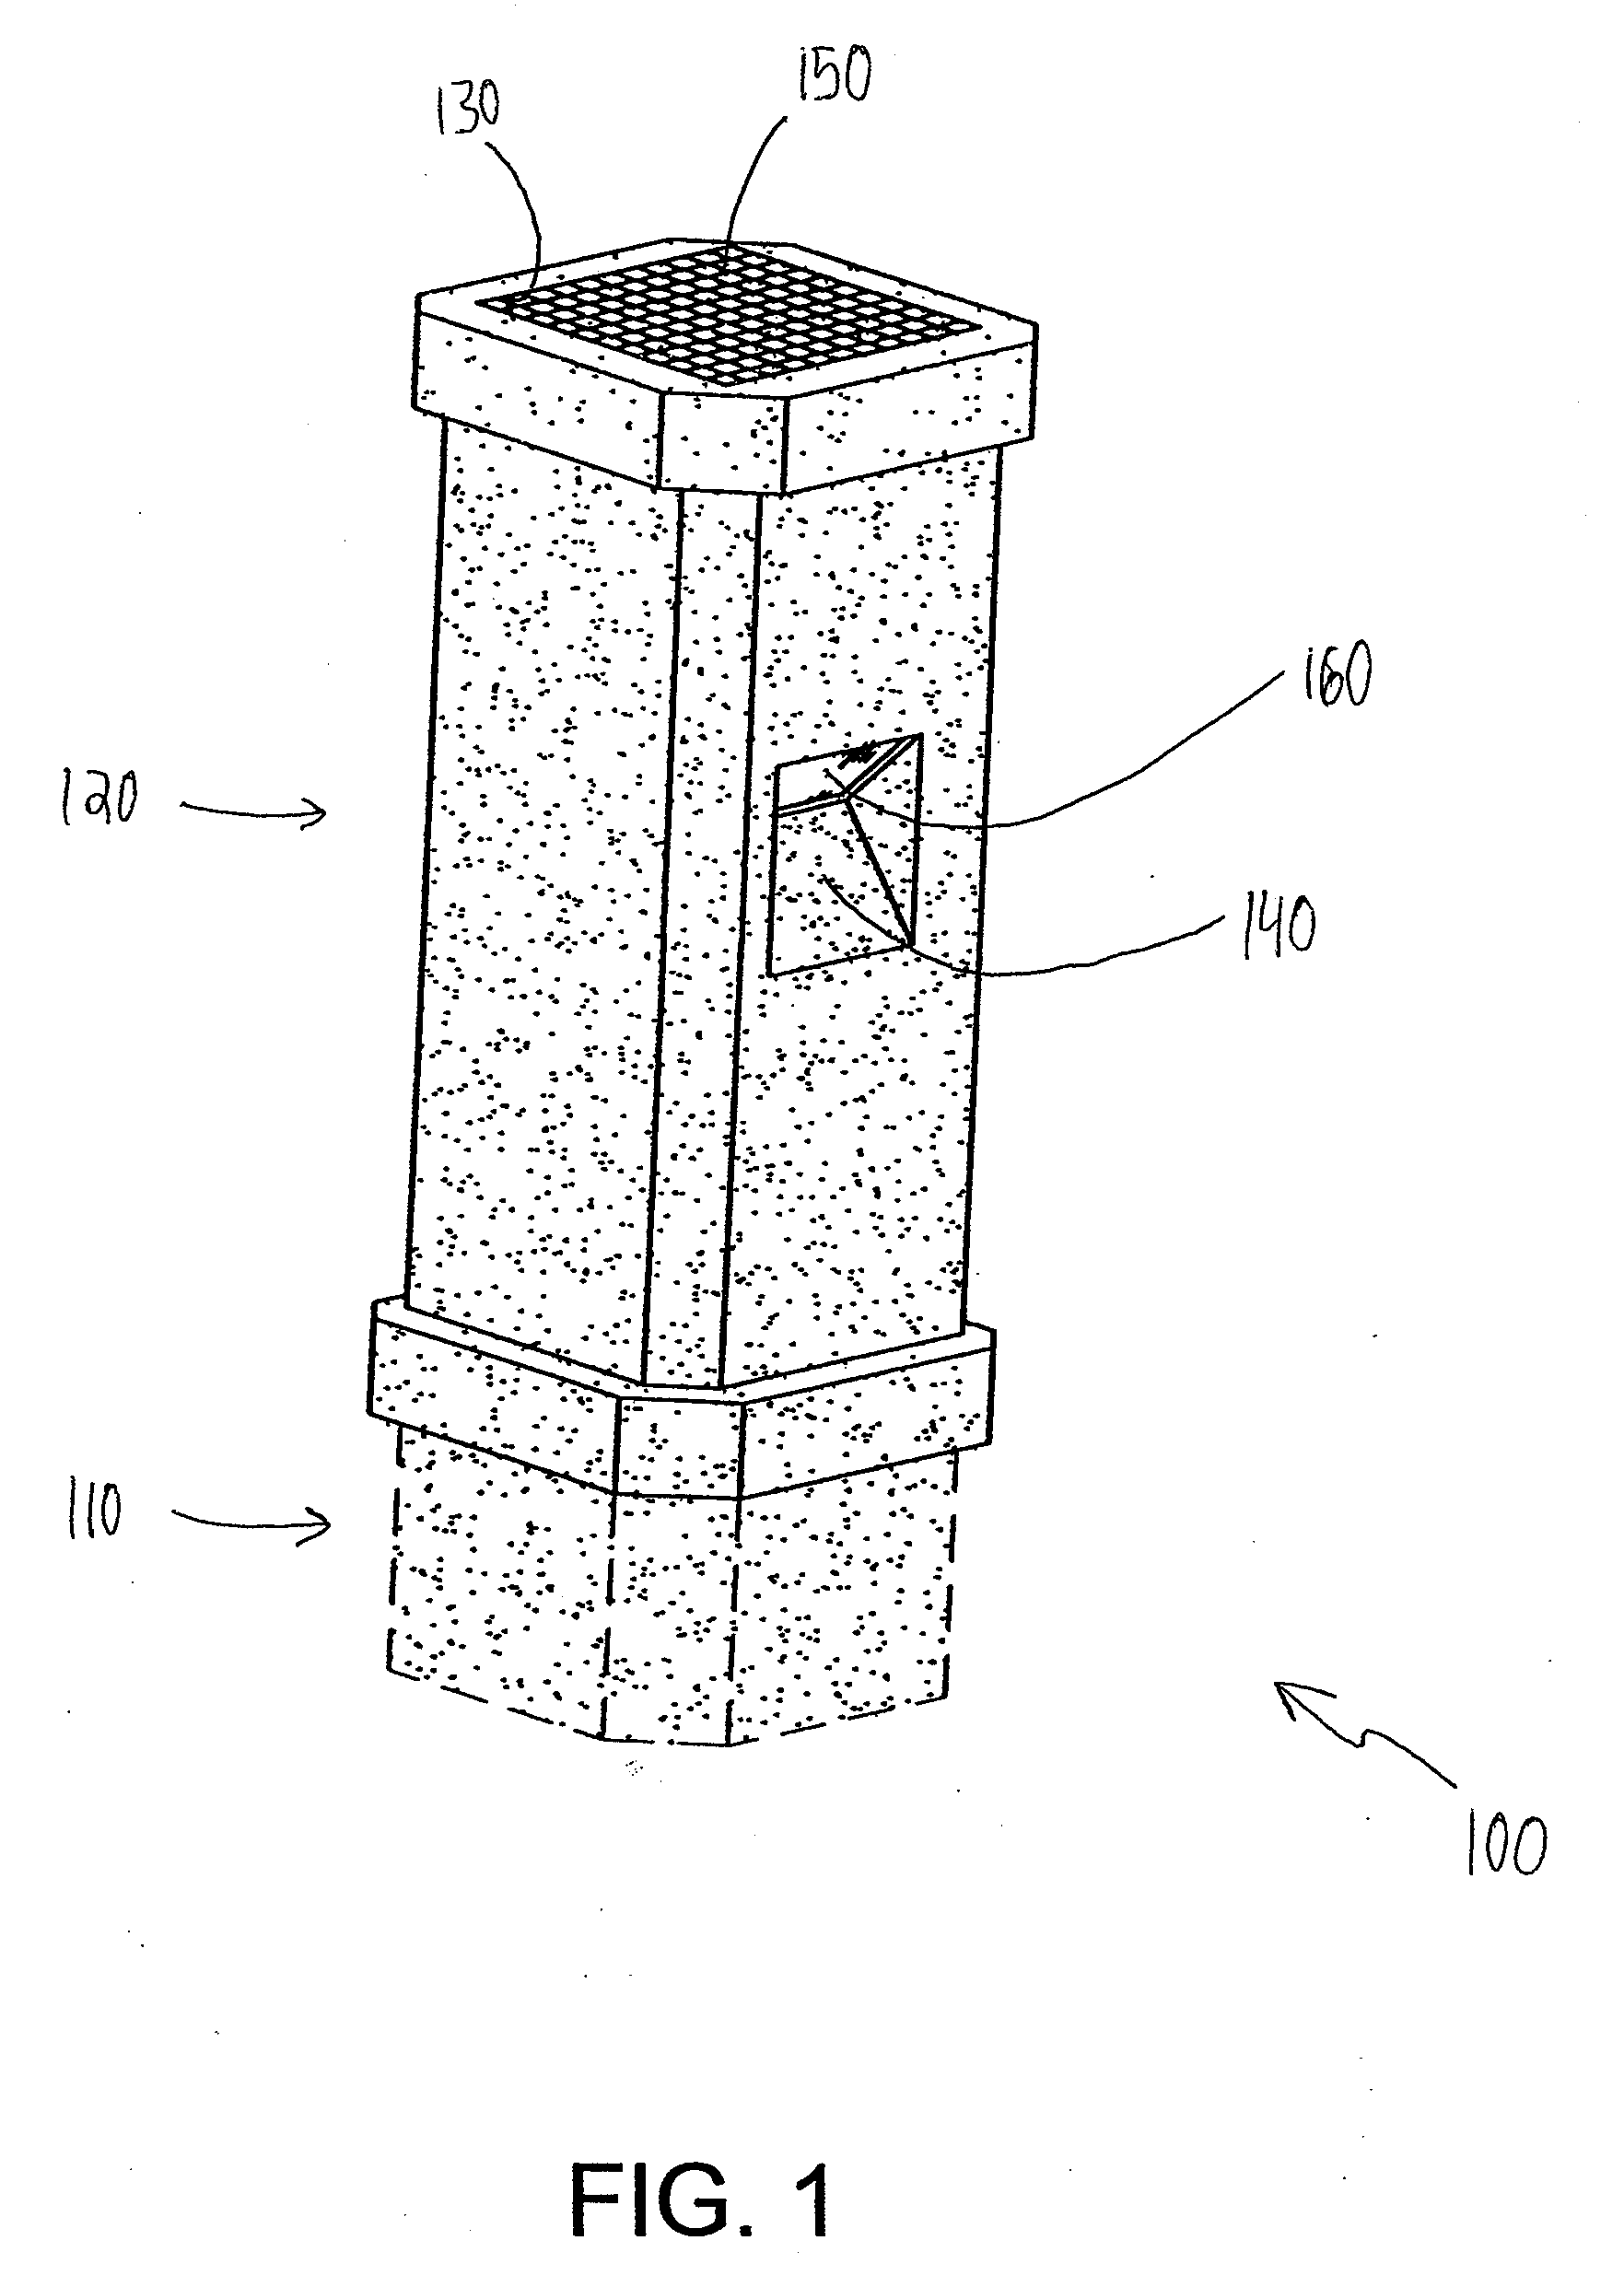 System and method for an outdoor lighting feature with an integrated solar panel